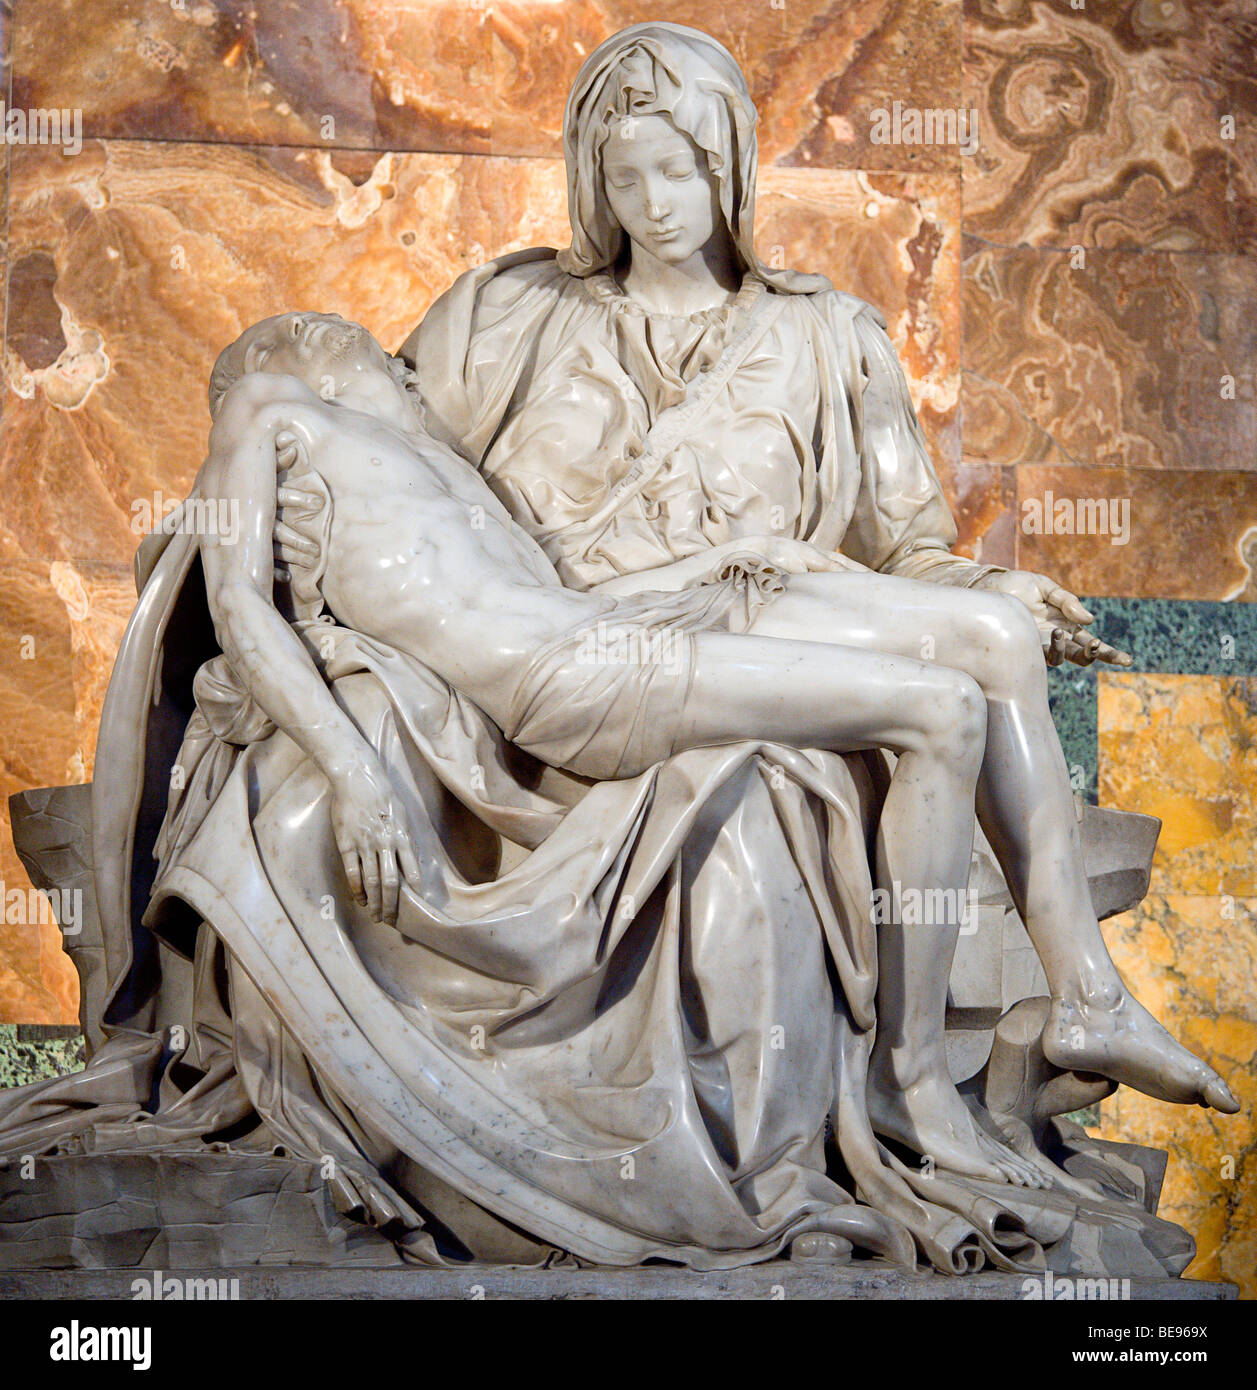 ITALY Lazio Rome Vatican City The Renaissance Pieta by Michelangelo in St Peter's Basilica. Mary holds Jesus after crucifixion Stock Photo